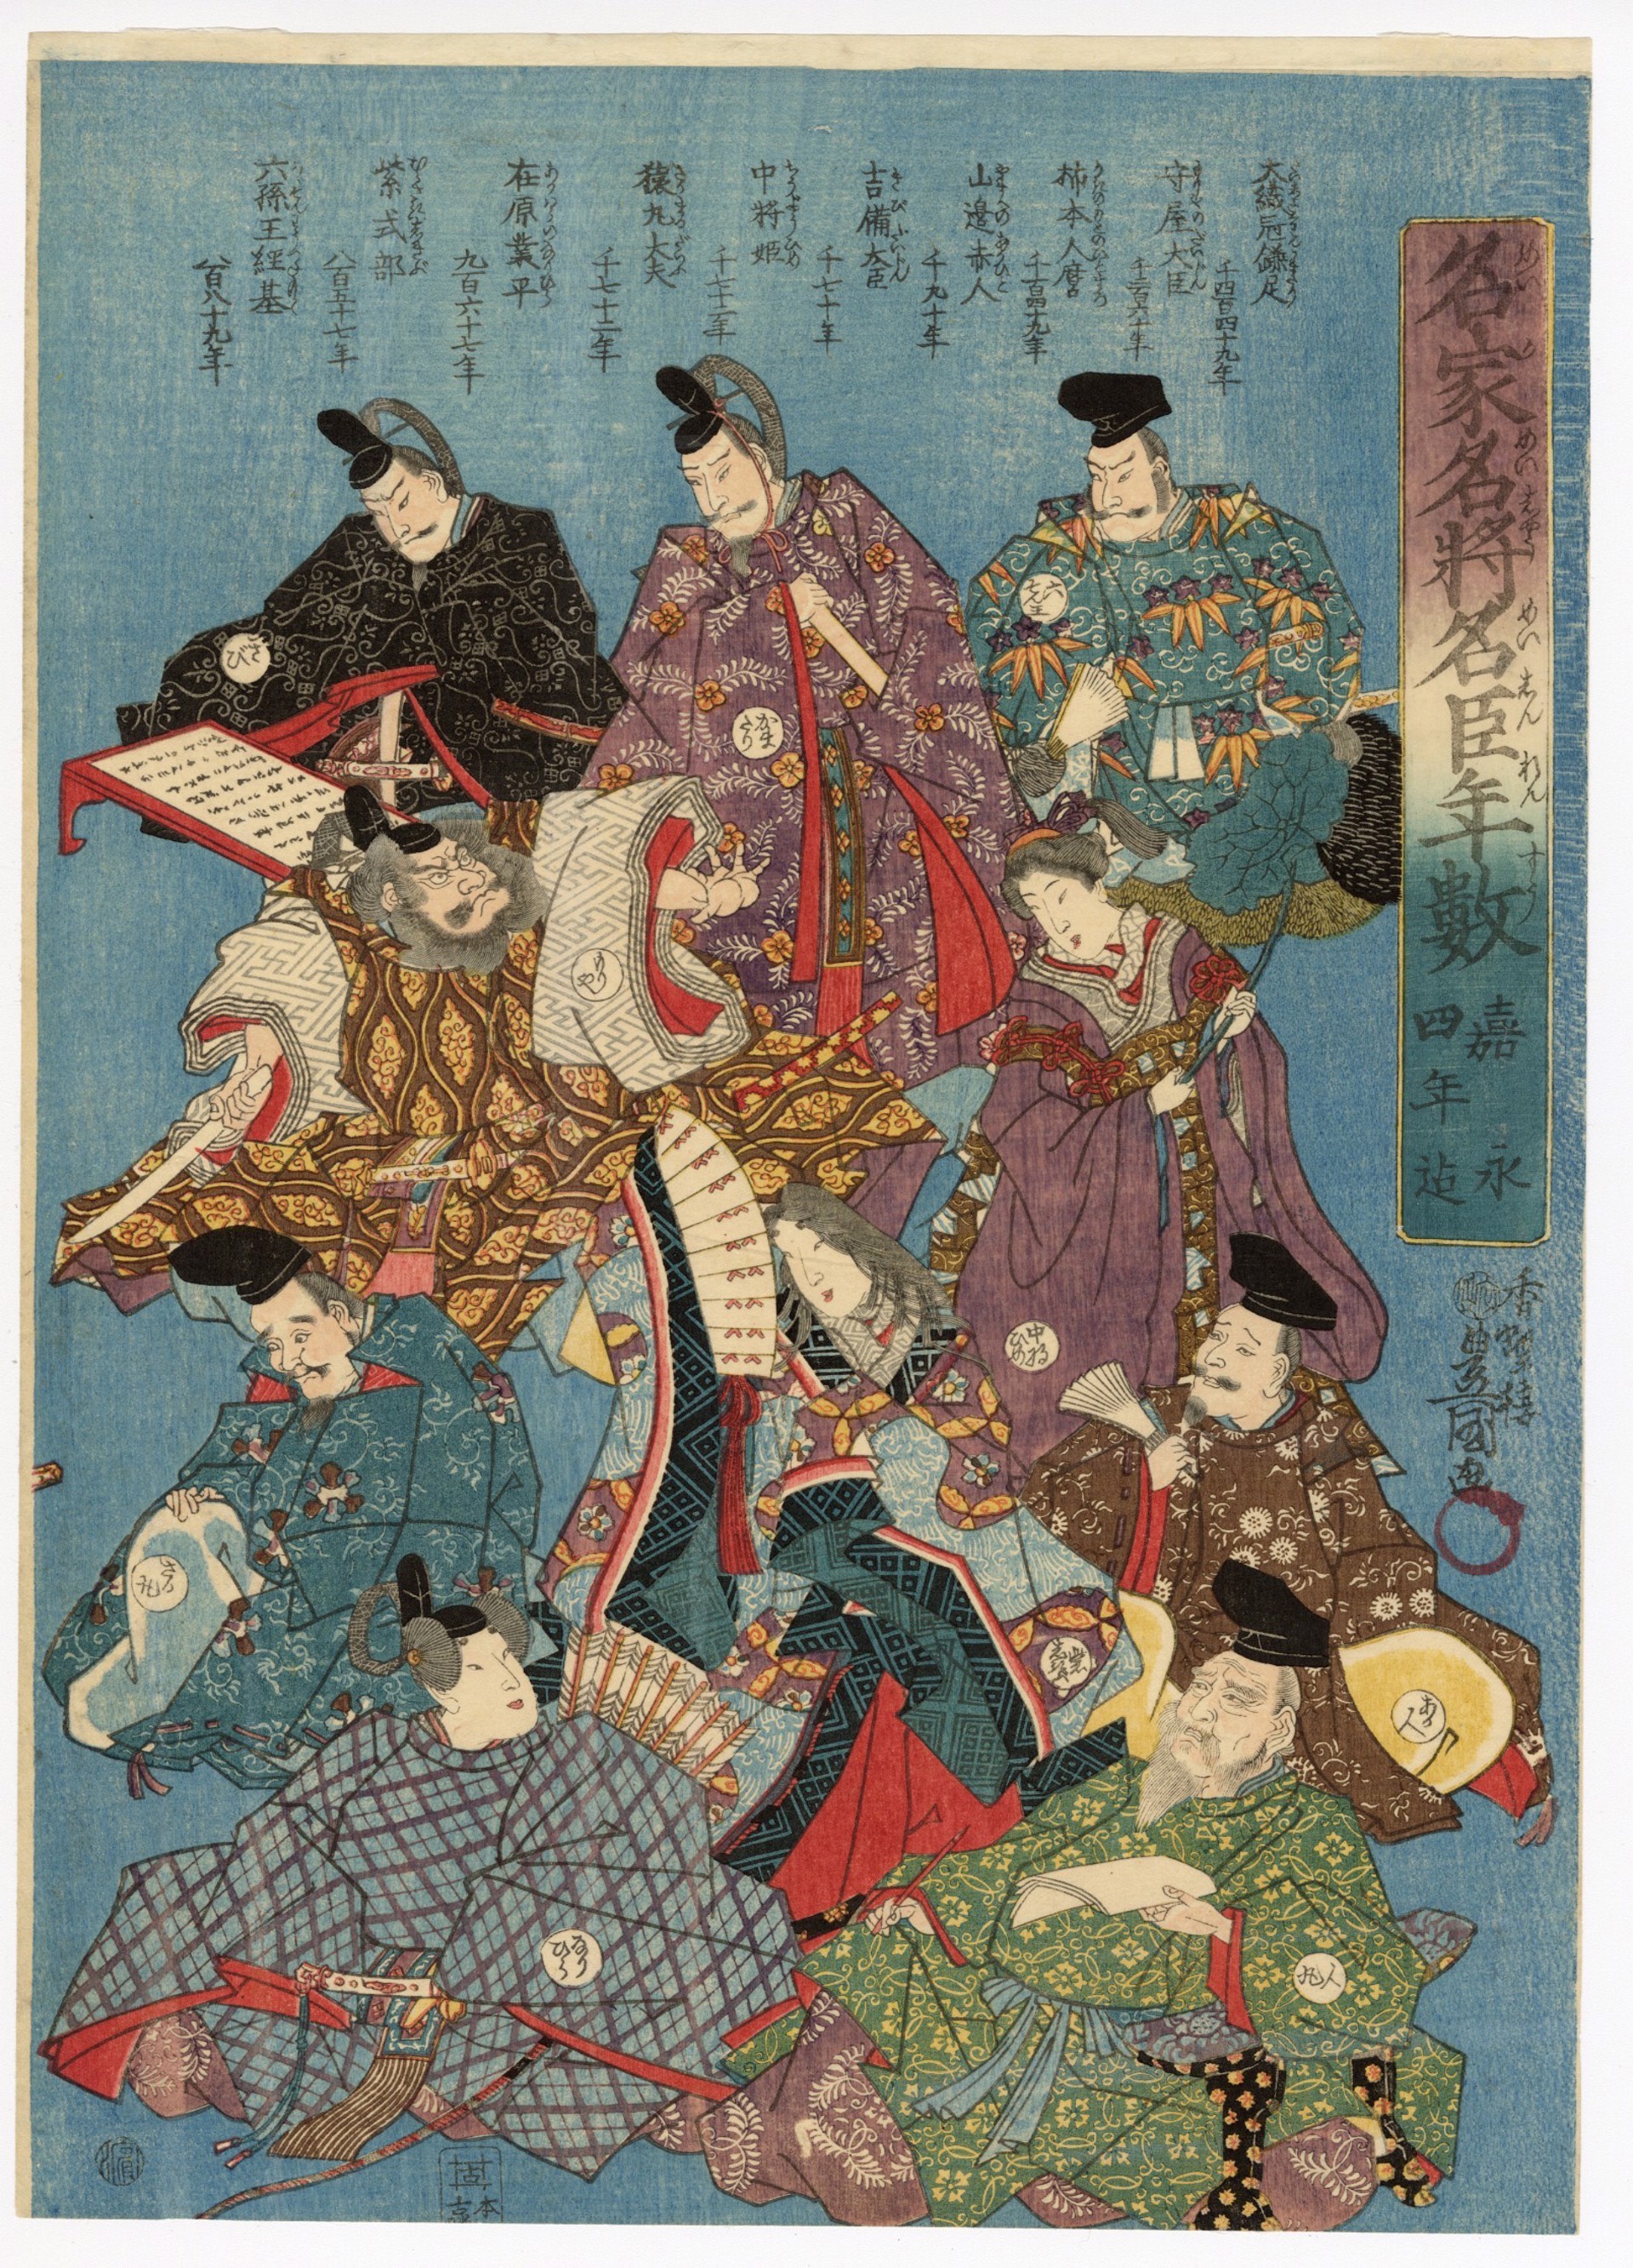 Famous Nobles, Generals and Retainers of Famous Families up to Kaei 4 (1851) by Kunisada